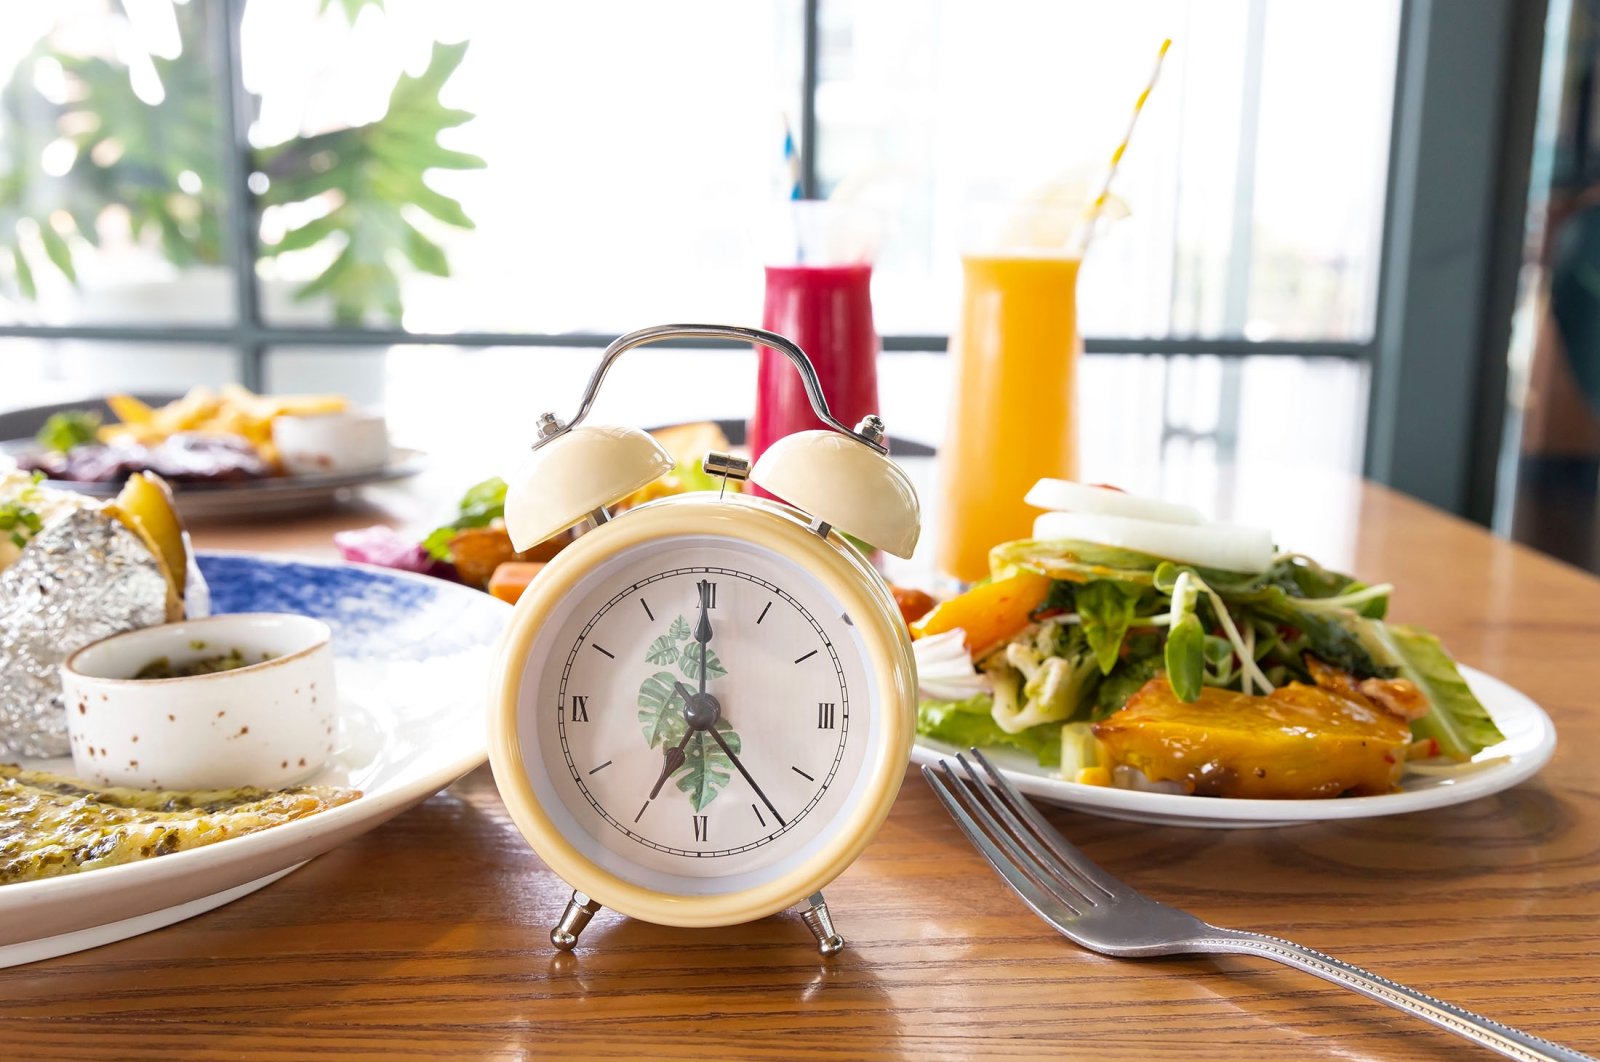 Intermittent fasting is the new hot trend with findings showing quicker weight loss than other diets in addition to many health benefits. (Shutterstock Photo)